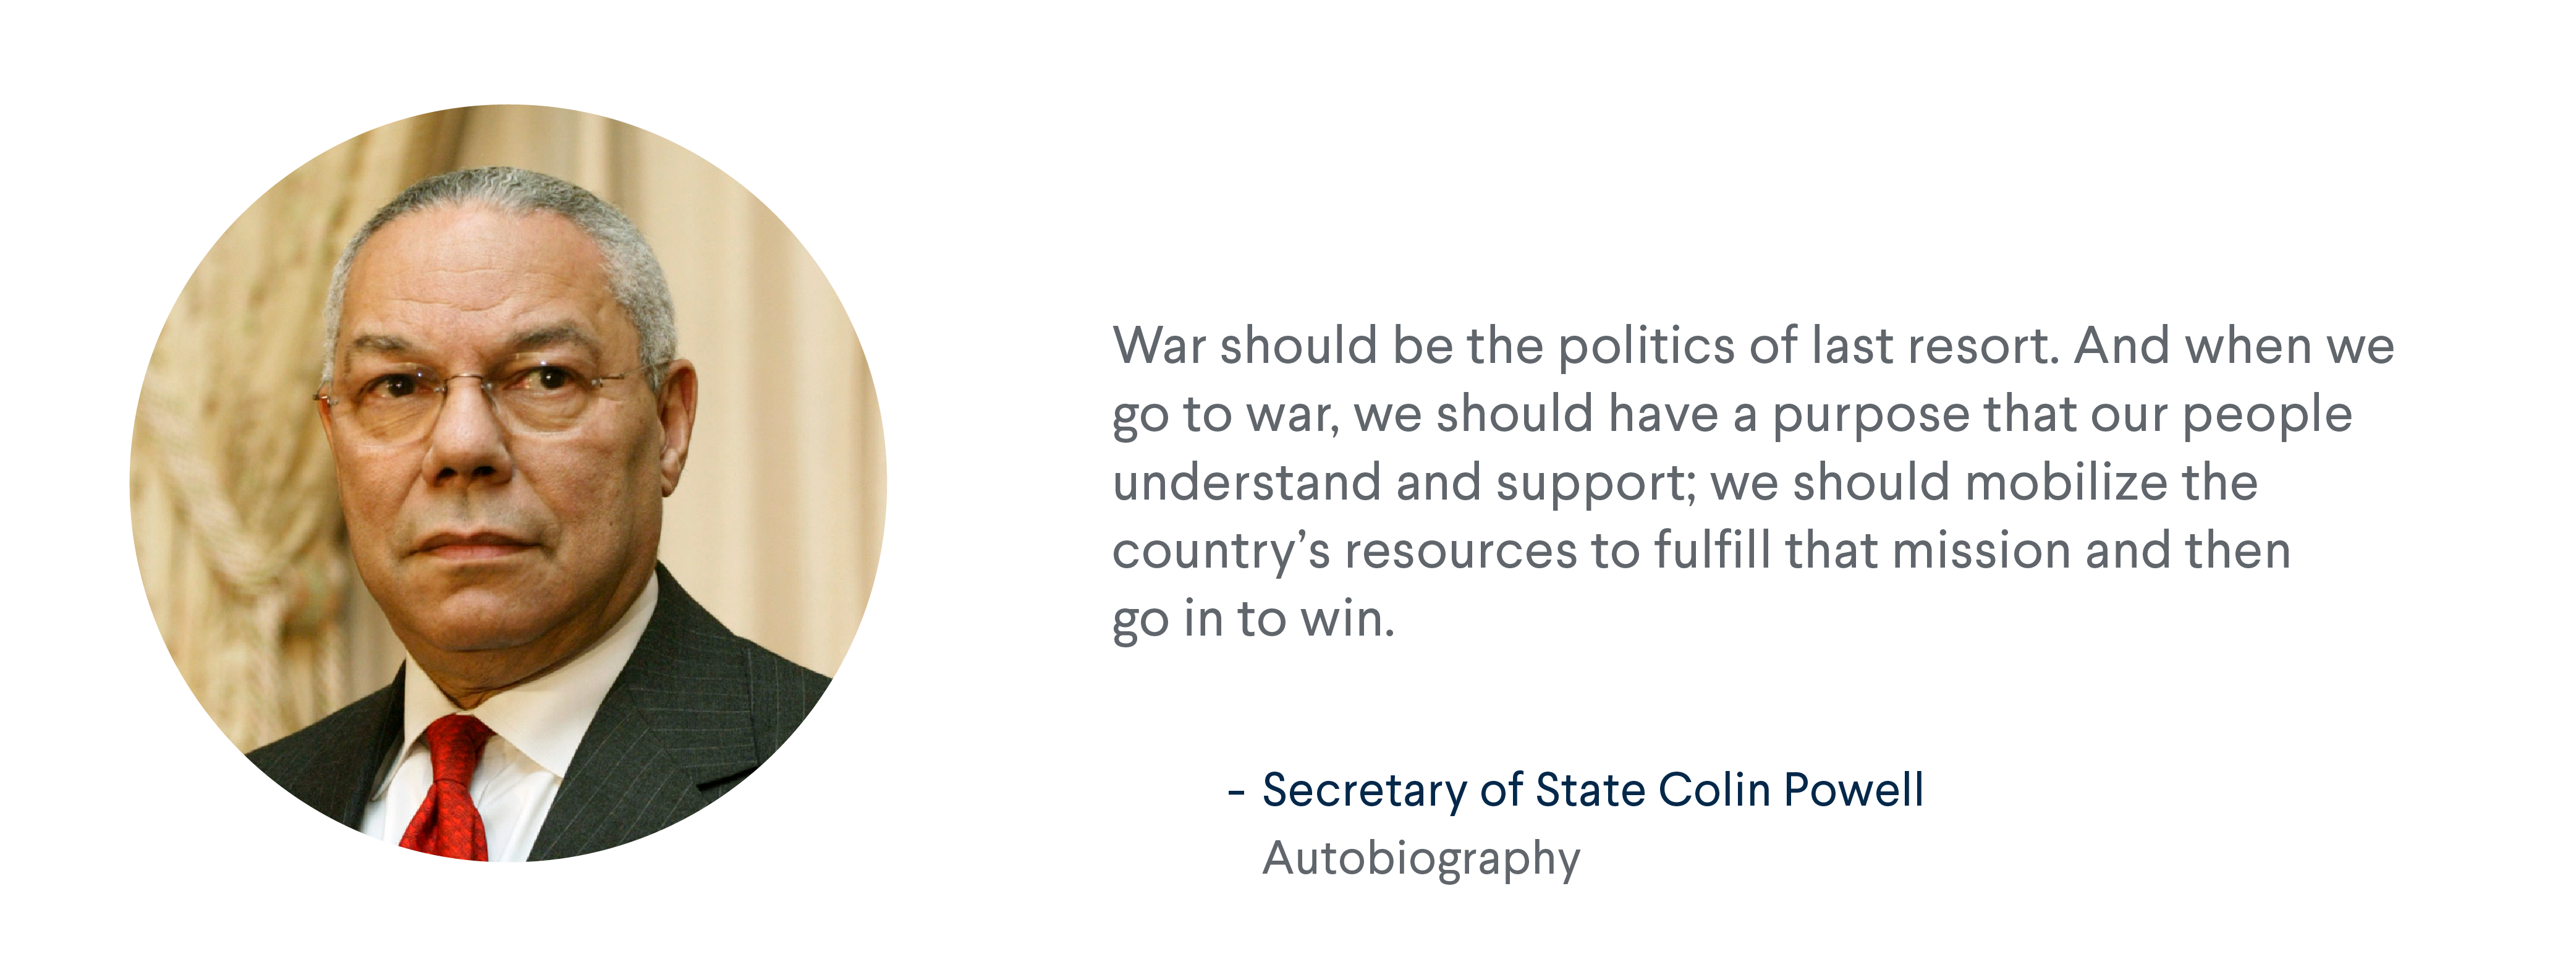 Quote from Secretary of State Colin Powell